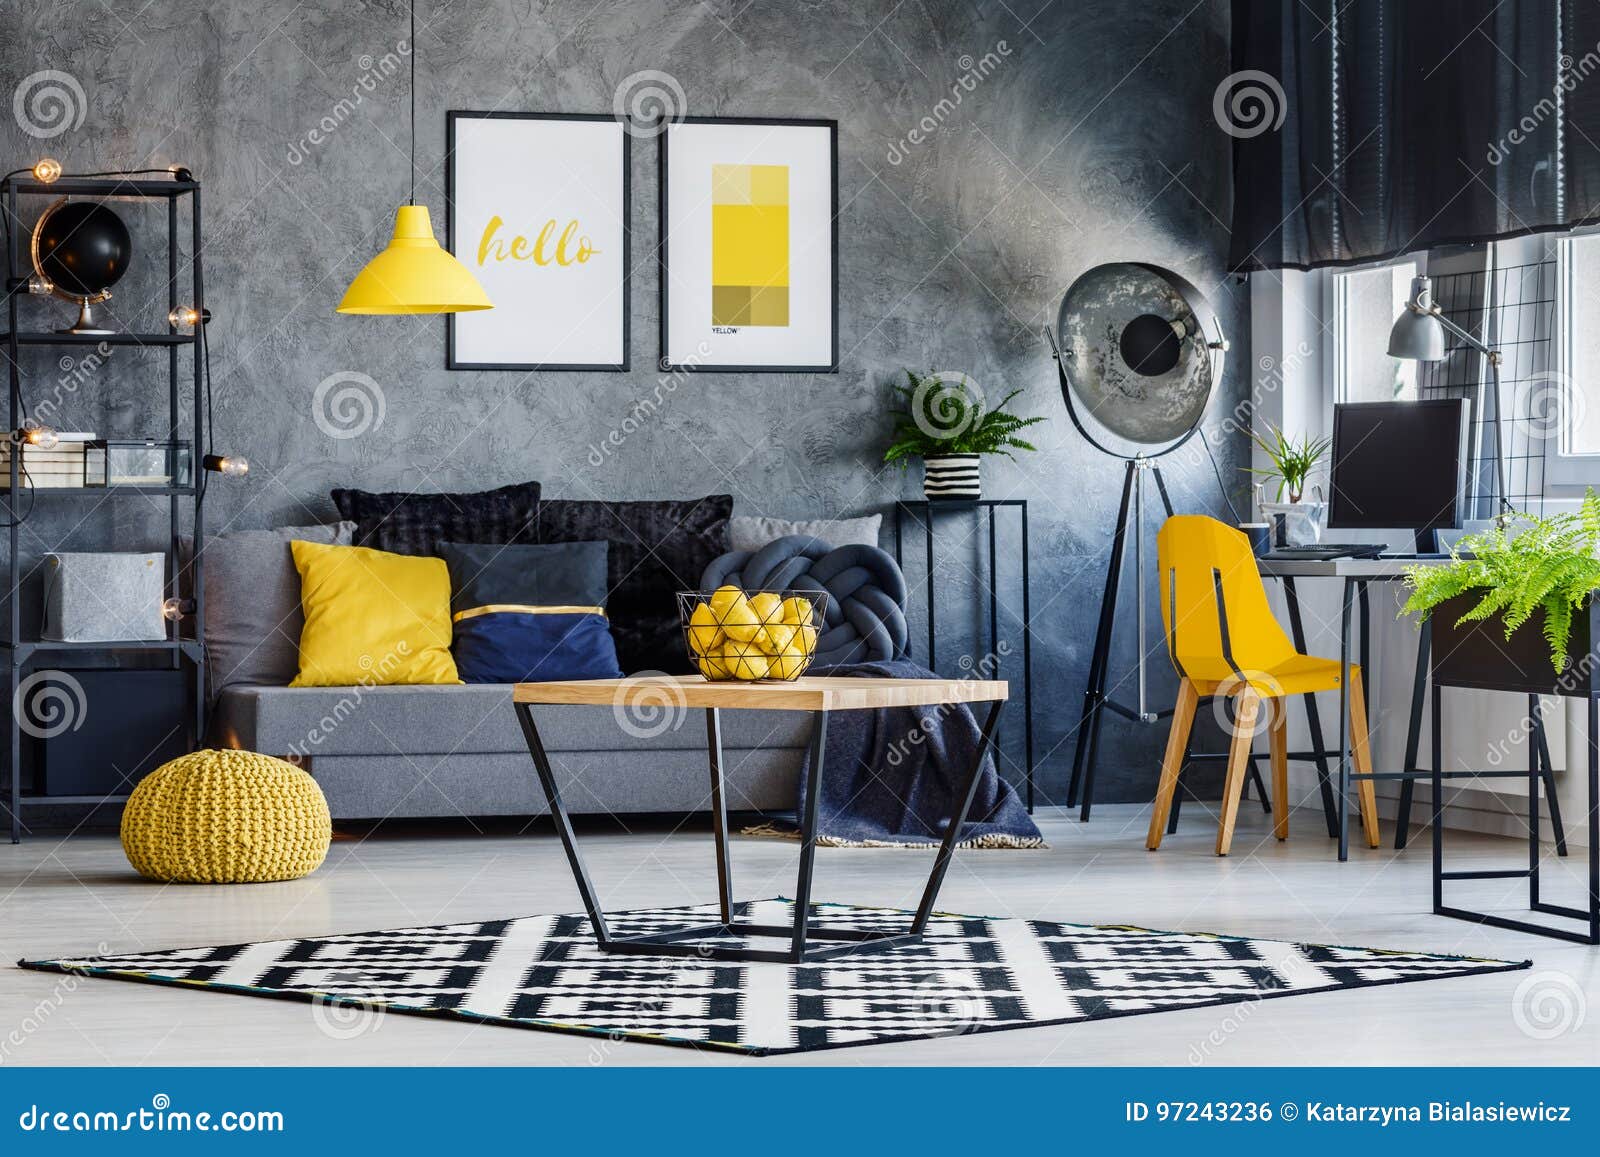 masculine room with yellow decor